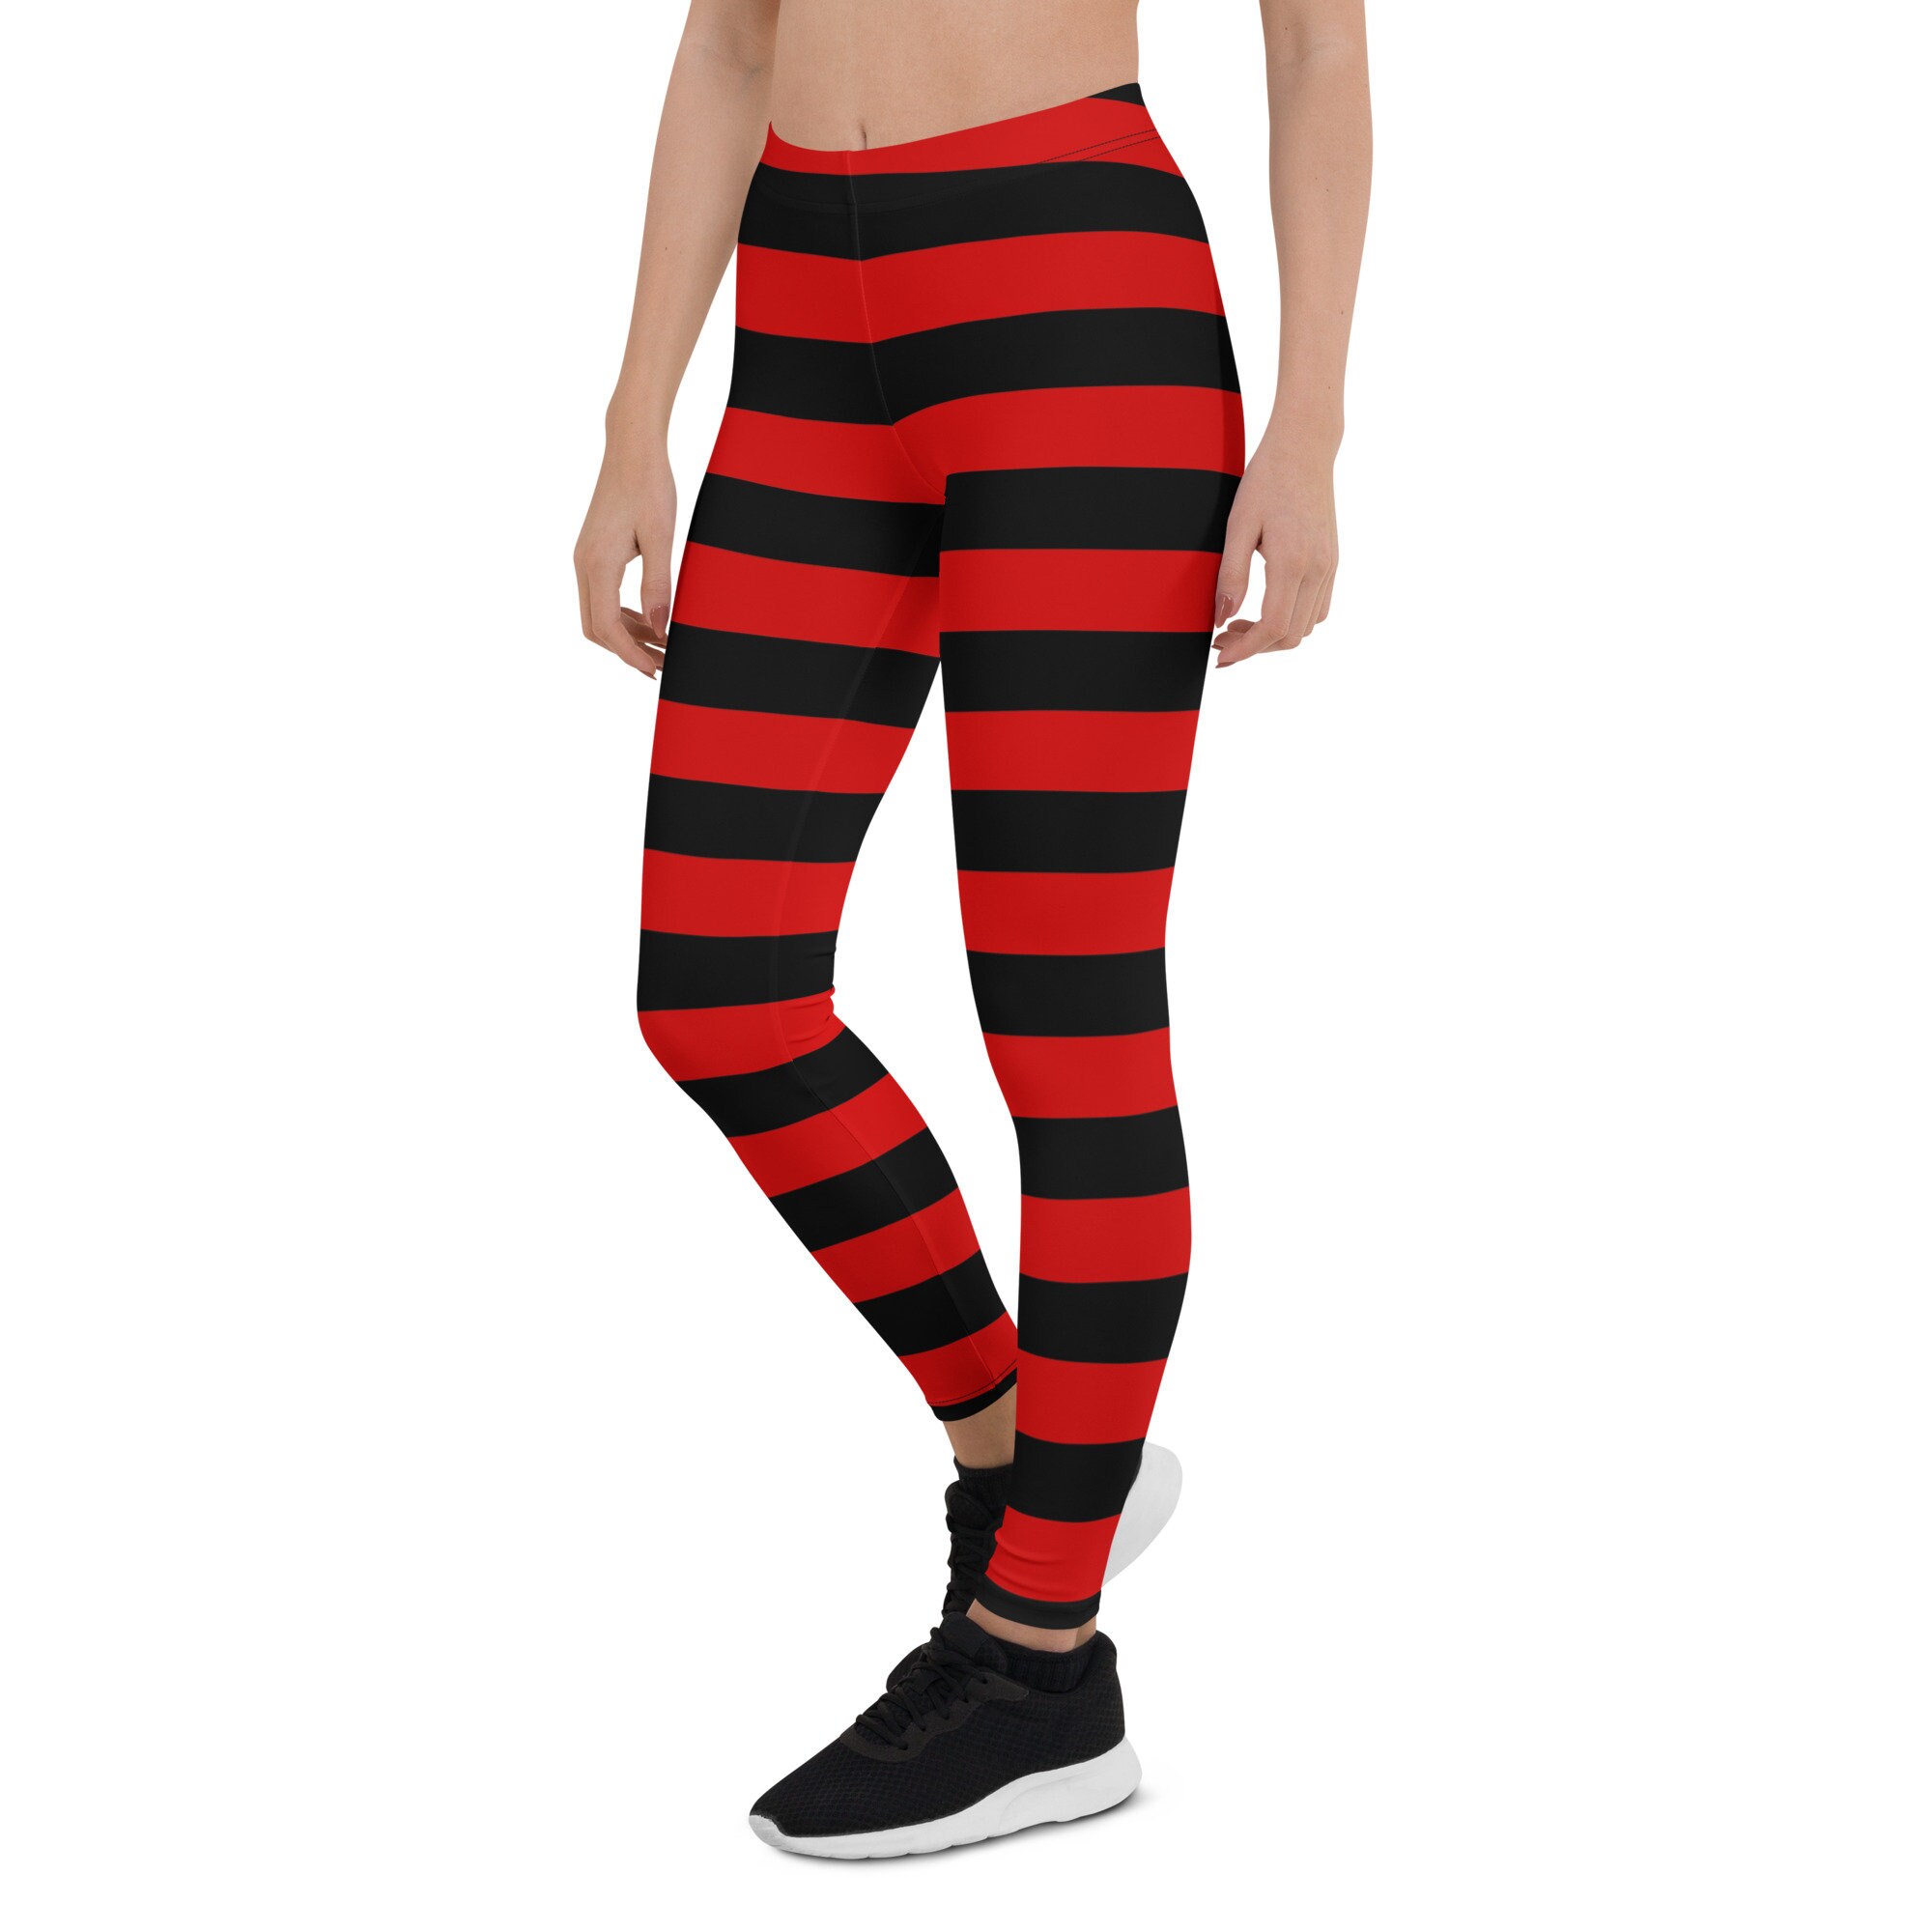 Striped Leggings Women, Witch Tights Halloween Goth Black Orange Purple  White Red Printed Yoga Pants Plus Size Kids Youth Adult Teen Graphic -   Canada